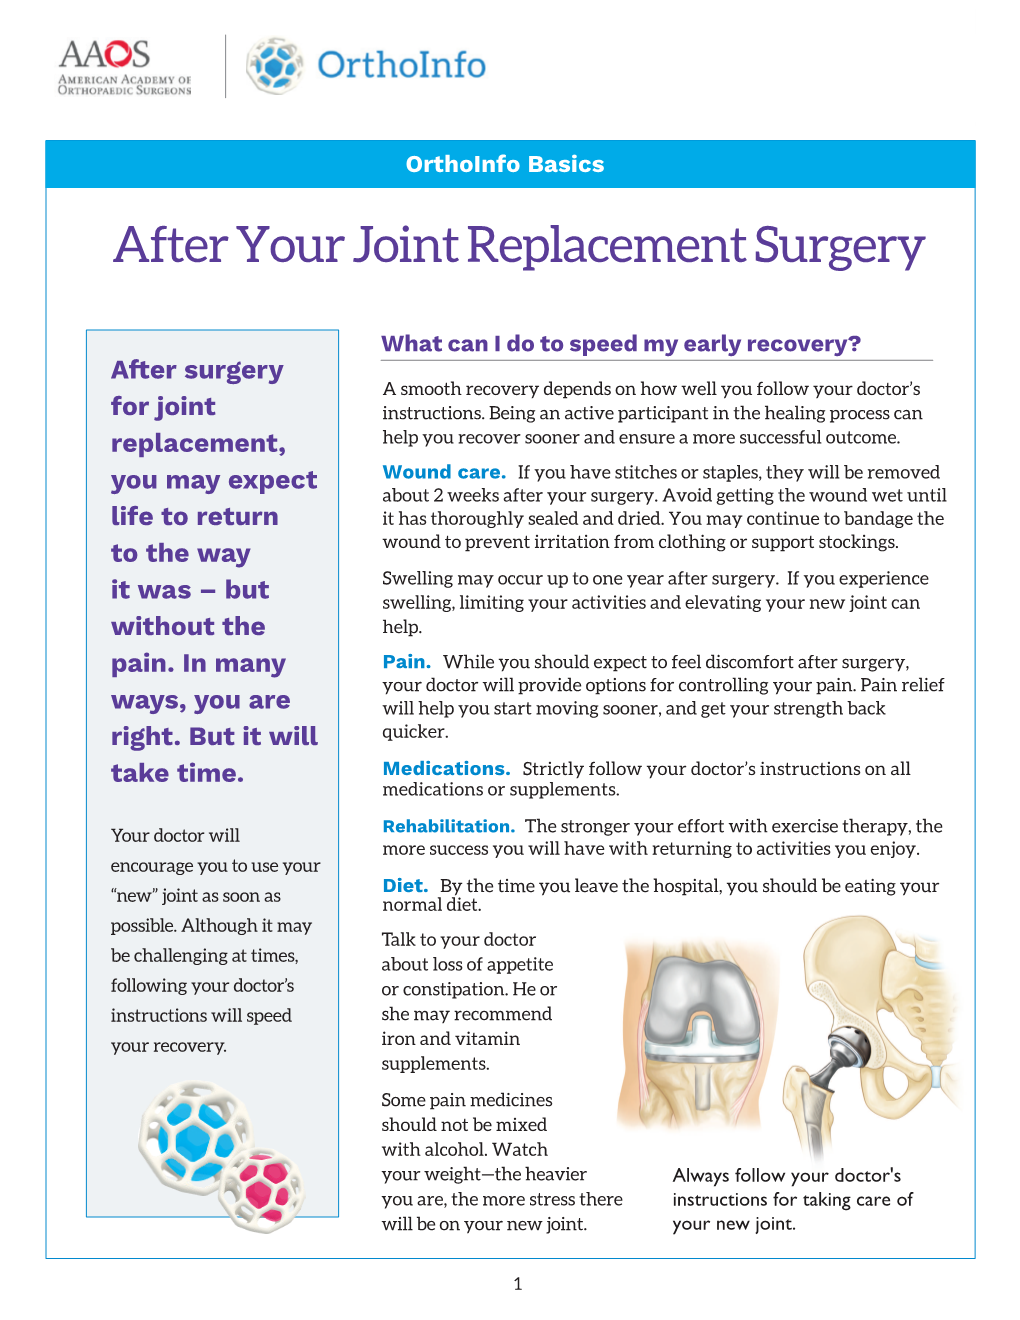 After Your Joint Replacement Surgery